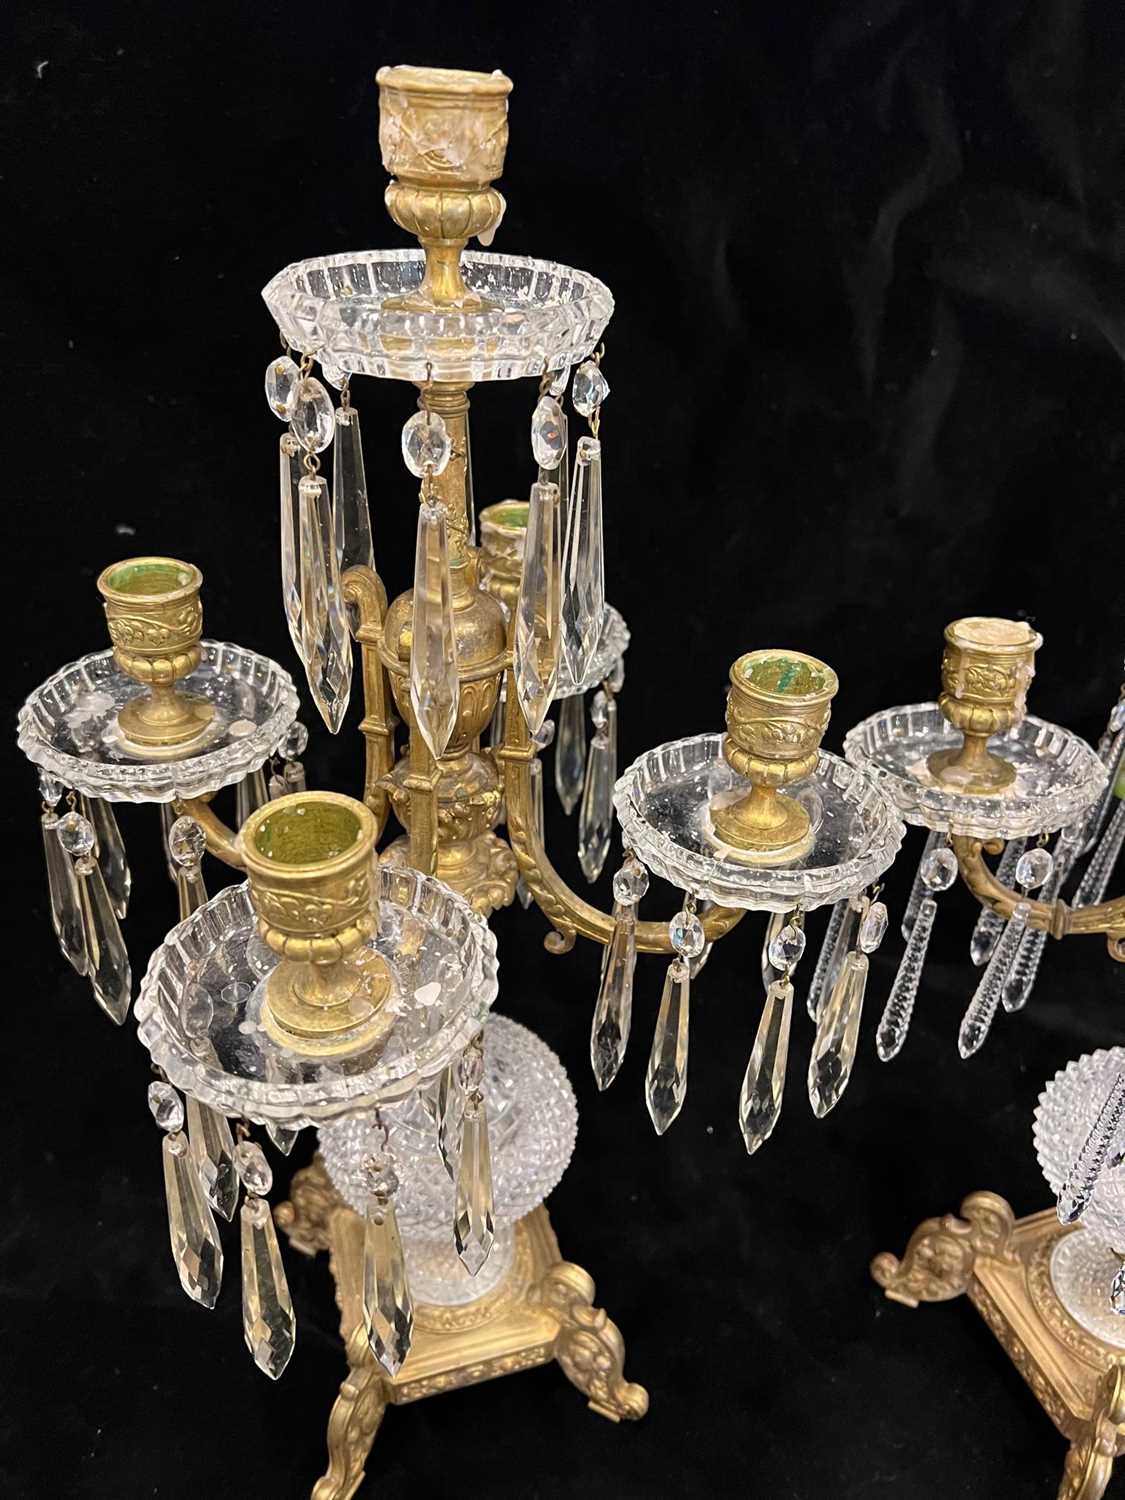 BACCARAT: AN IMPORTANT PAIR OF LATE 19TH CENTURY CUT CRYSTAL GLASS AND ORMOLU CANDELABRA - Image 11 of 13